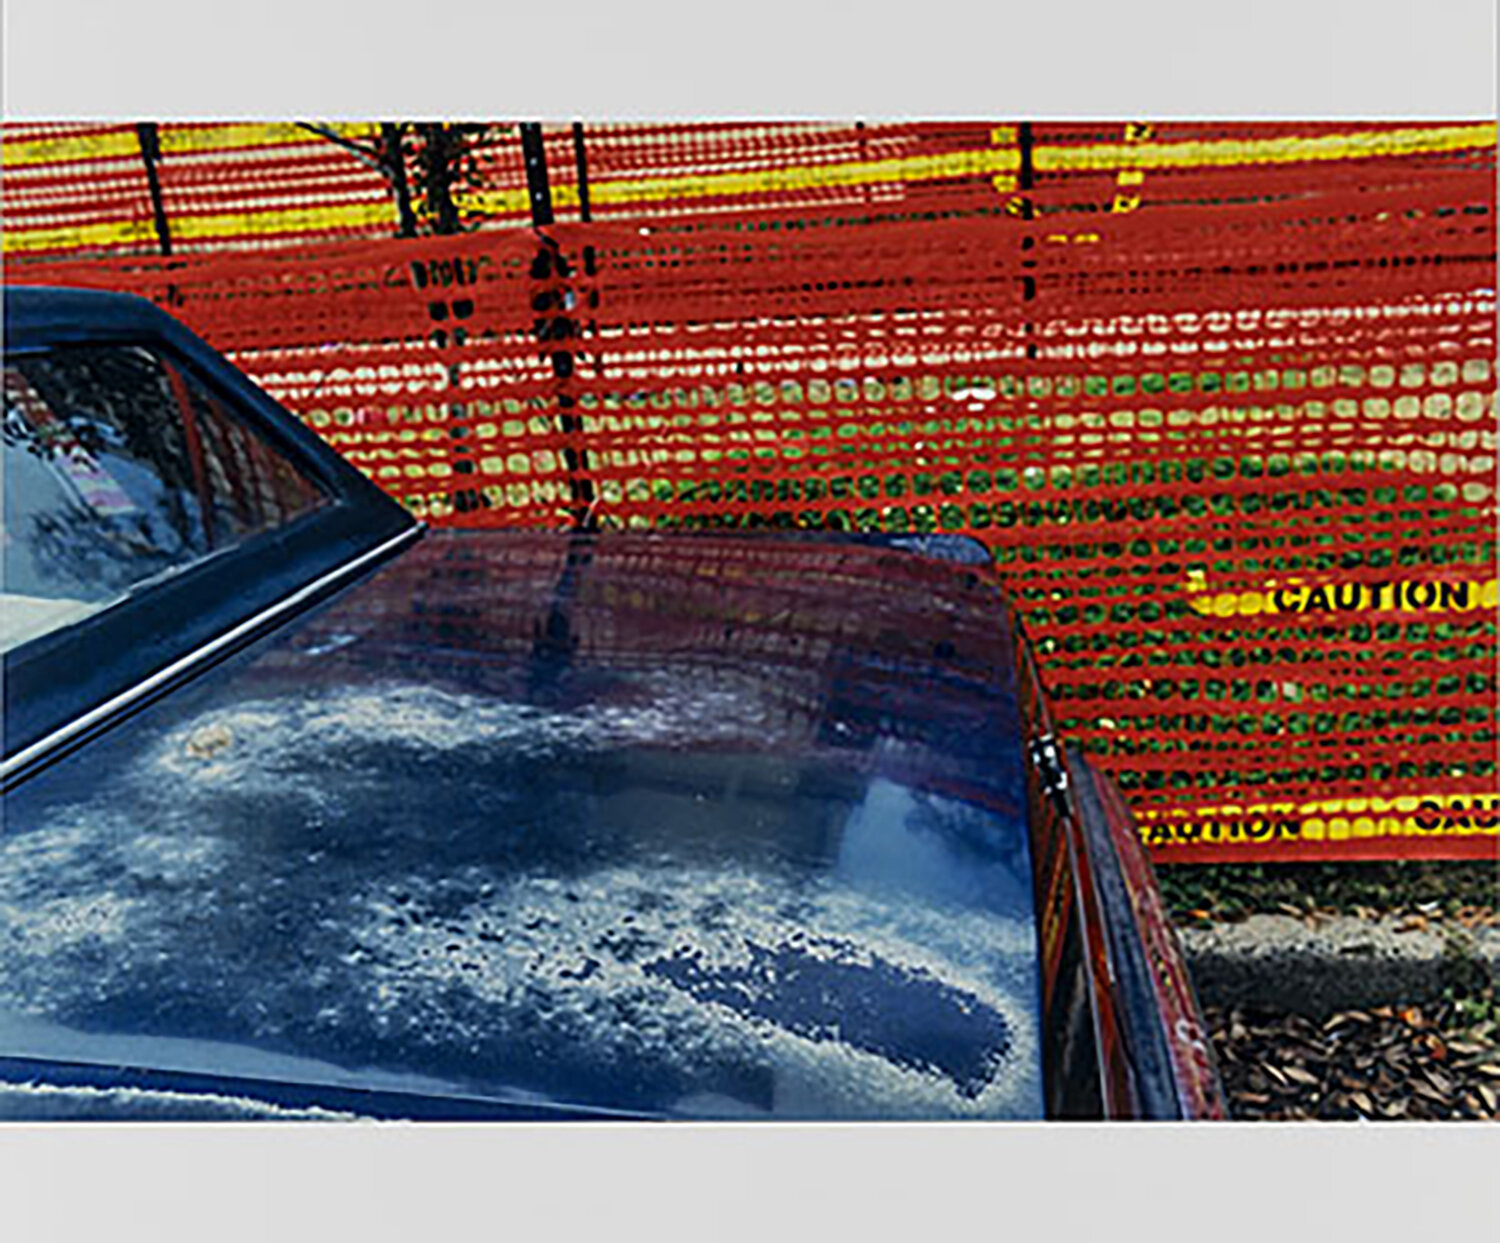   Blue car-red fence, New Orleans , 2003 Edition: 4/25 16 x 24 in. — Image Size The Do Good Fund, Inc., 2018-021 